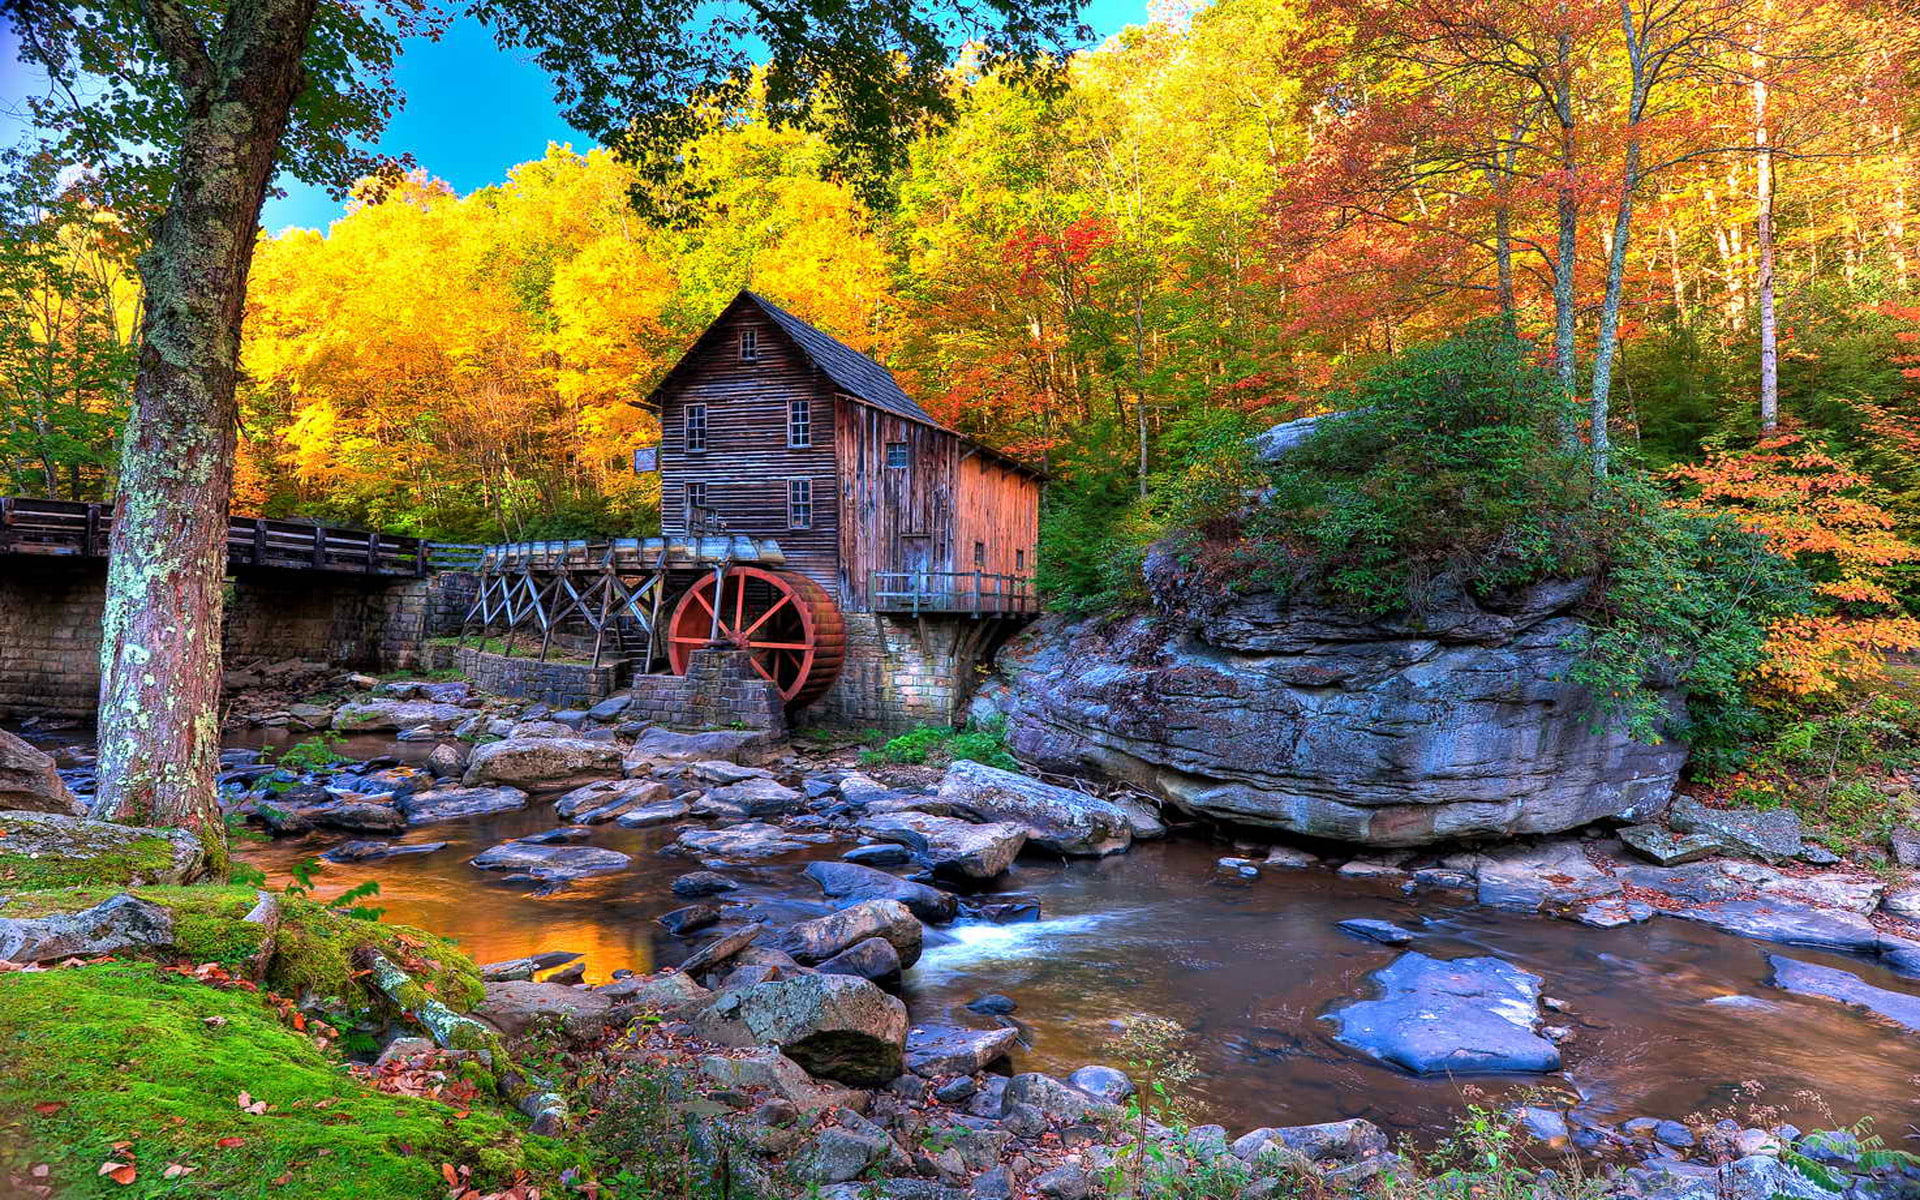 Old Wooden Mill Glade Creek Grist Mill In Abcock State Park, West Virginia 1920×1200